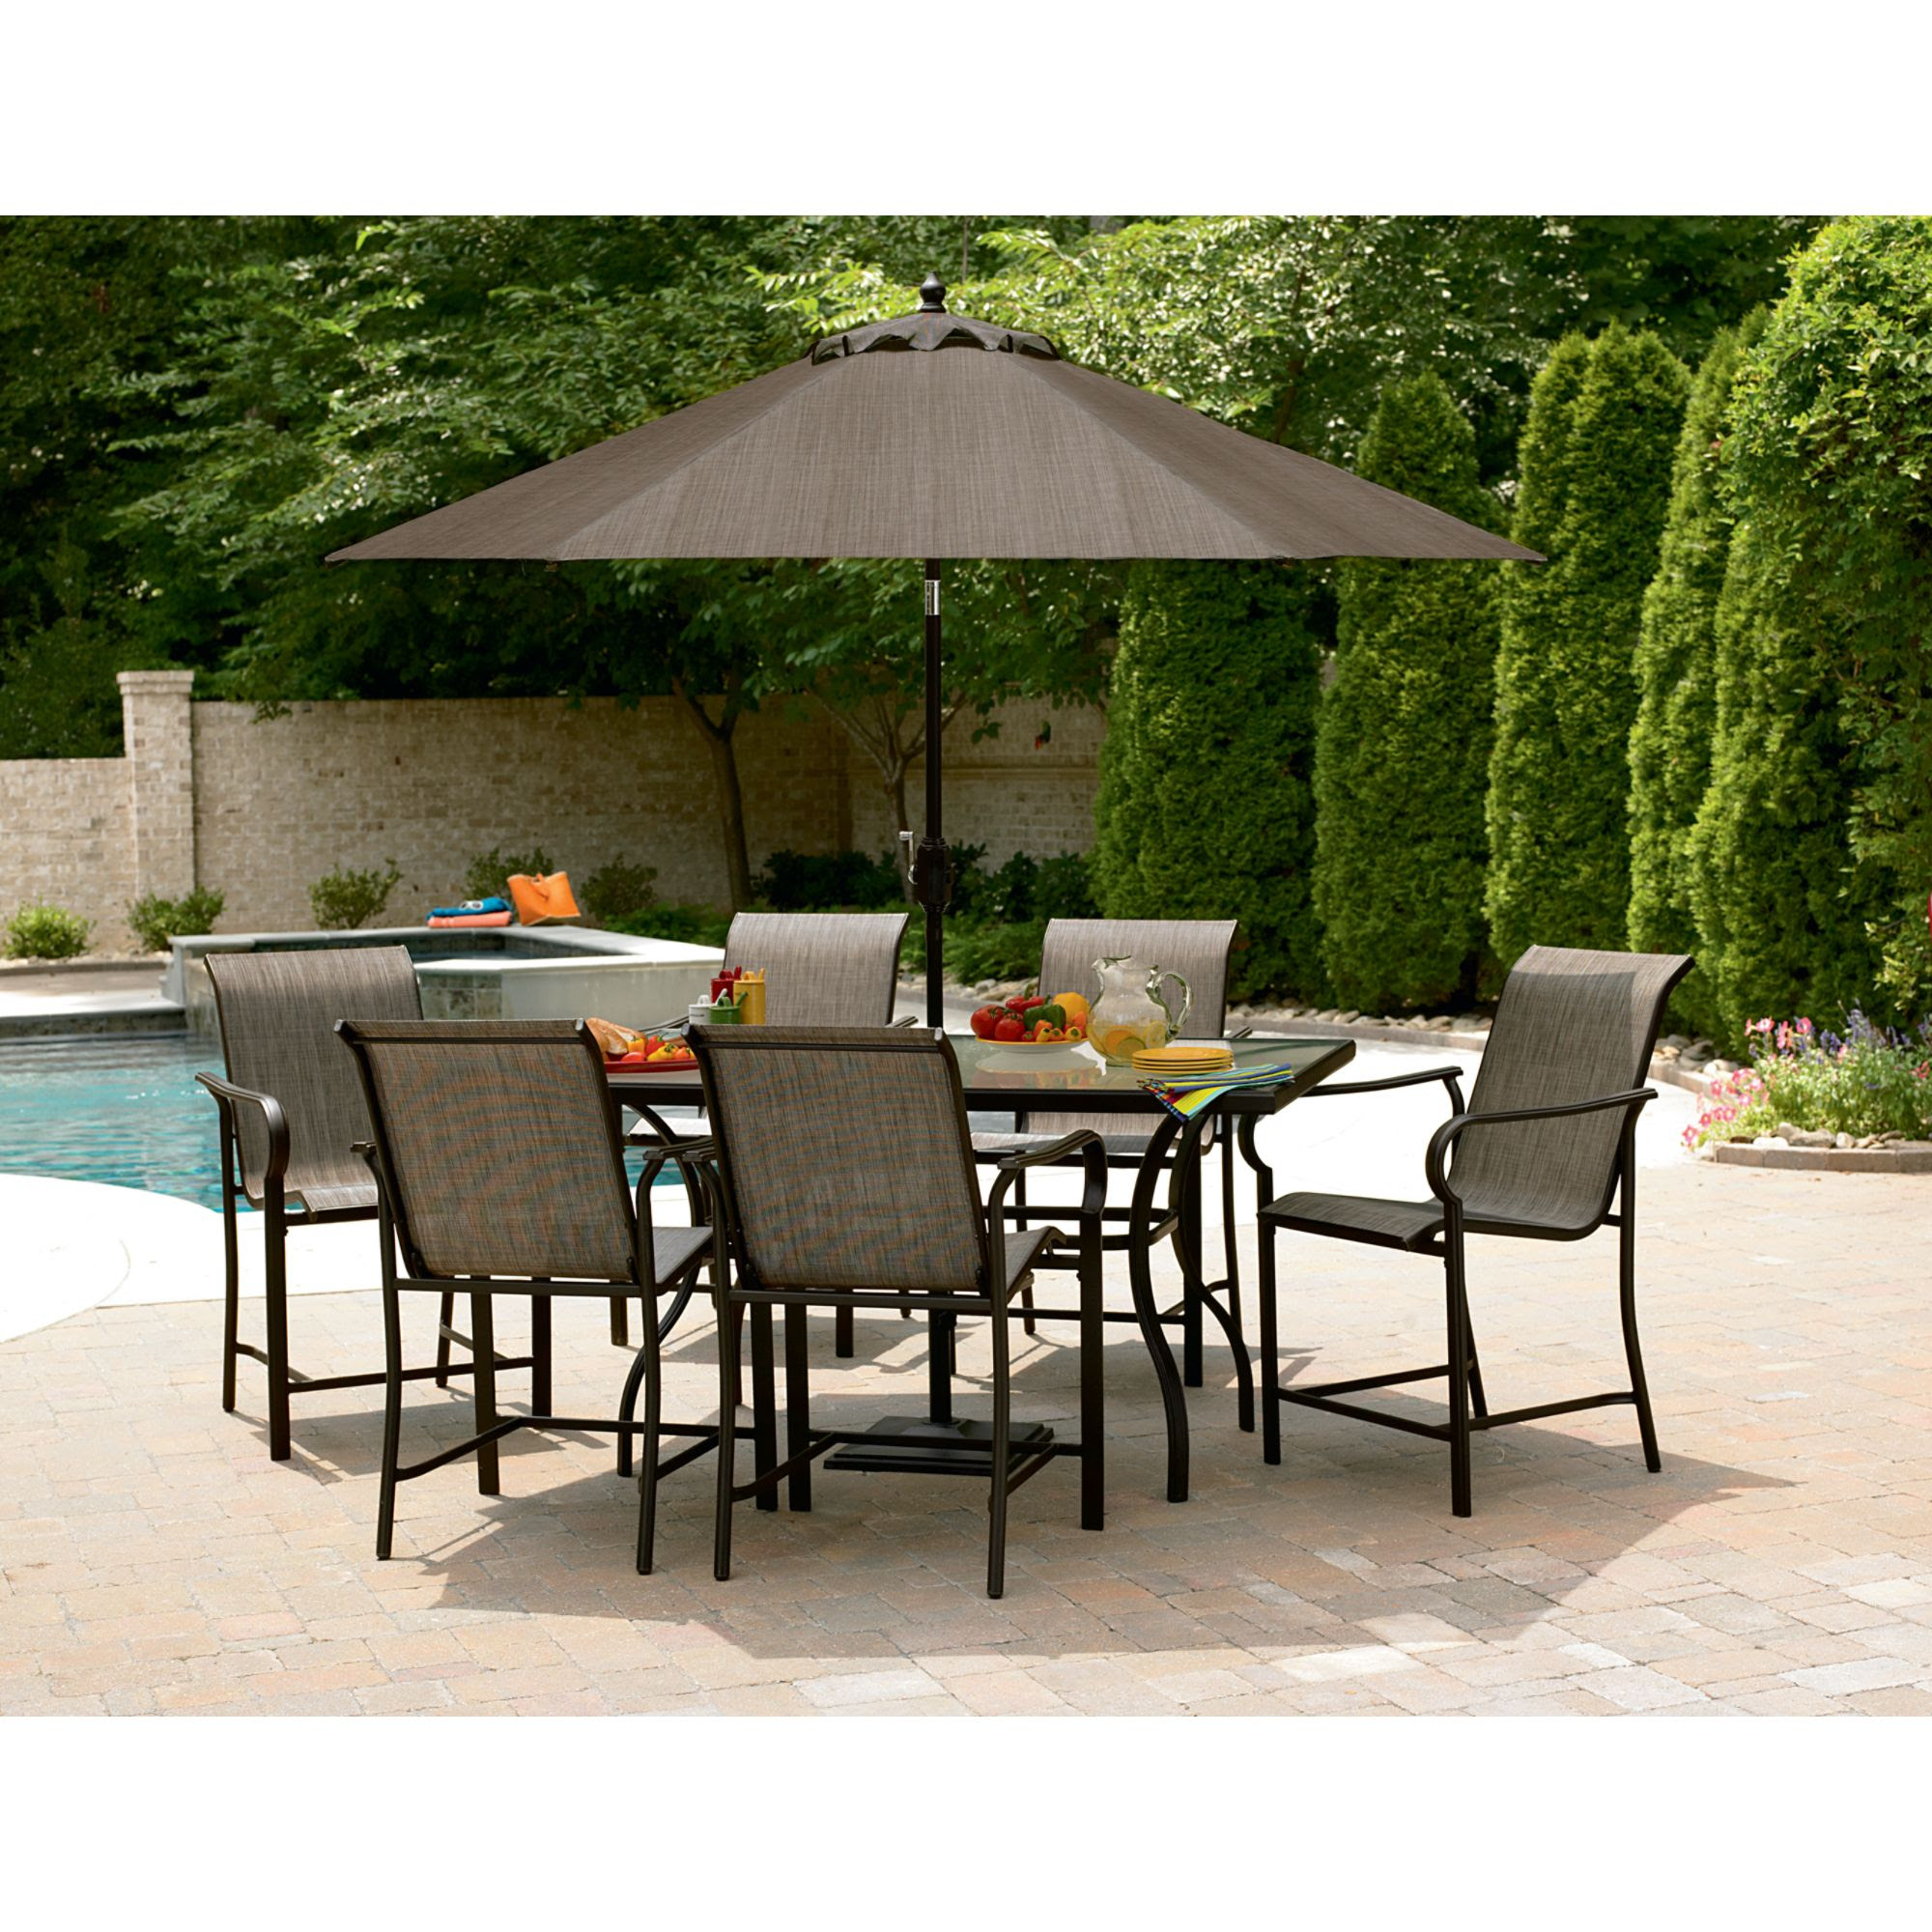 Garden Oasis East Point 7 Pc. High Dining Set | Yaxo